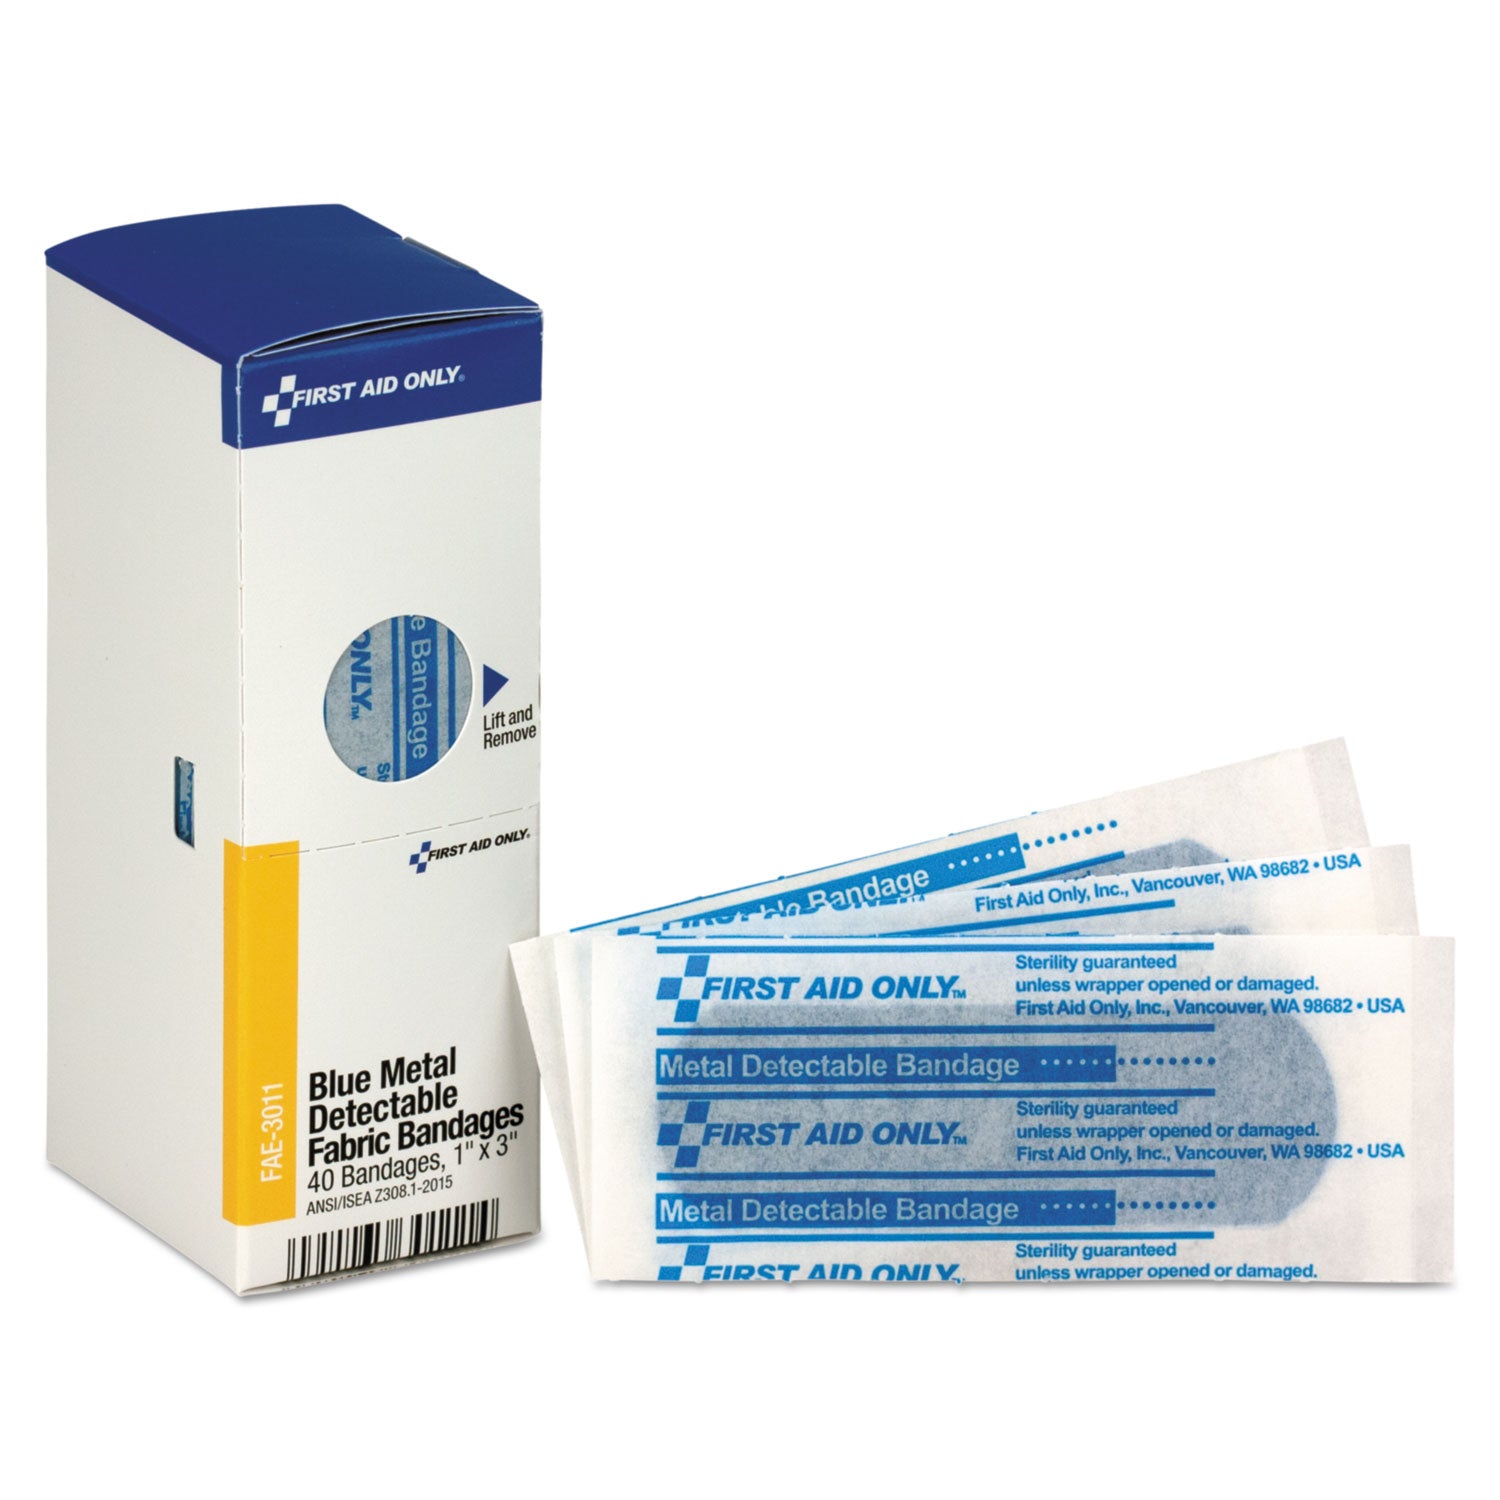 refill-for-smartcompliance-general-cabinet-blue-metal-detectable-bandages-1-x-3-40-box_faofae3011 - 1